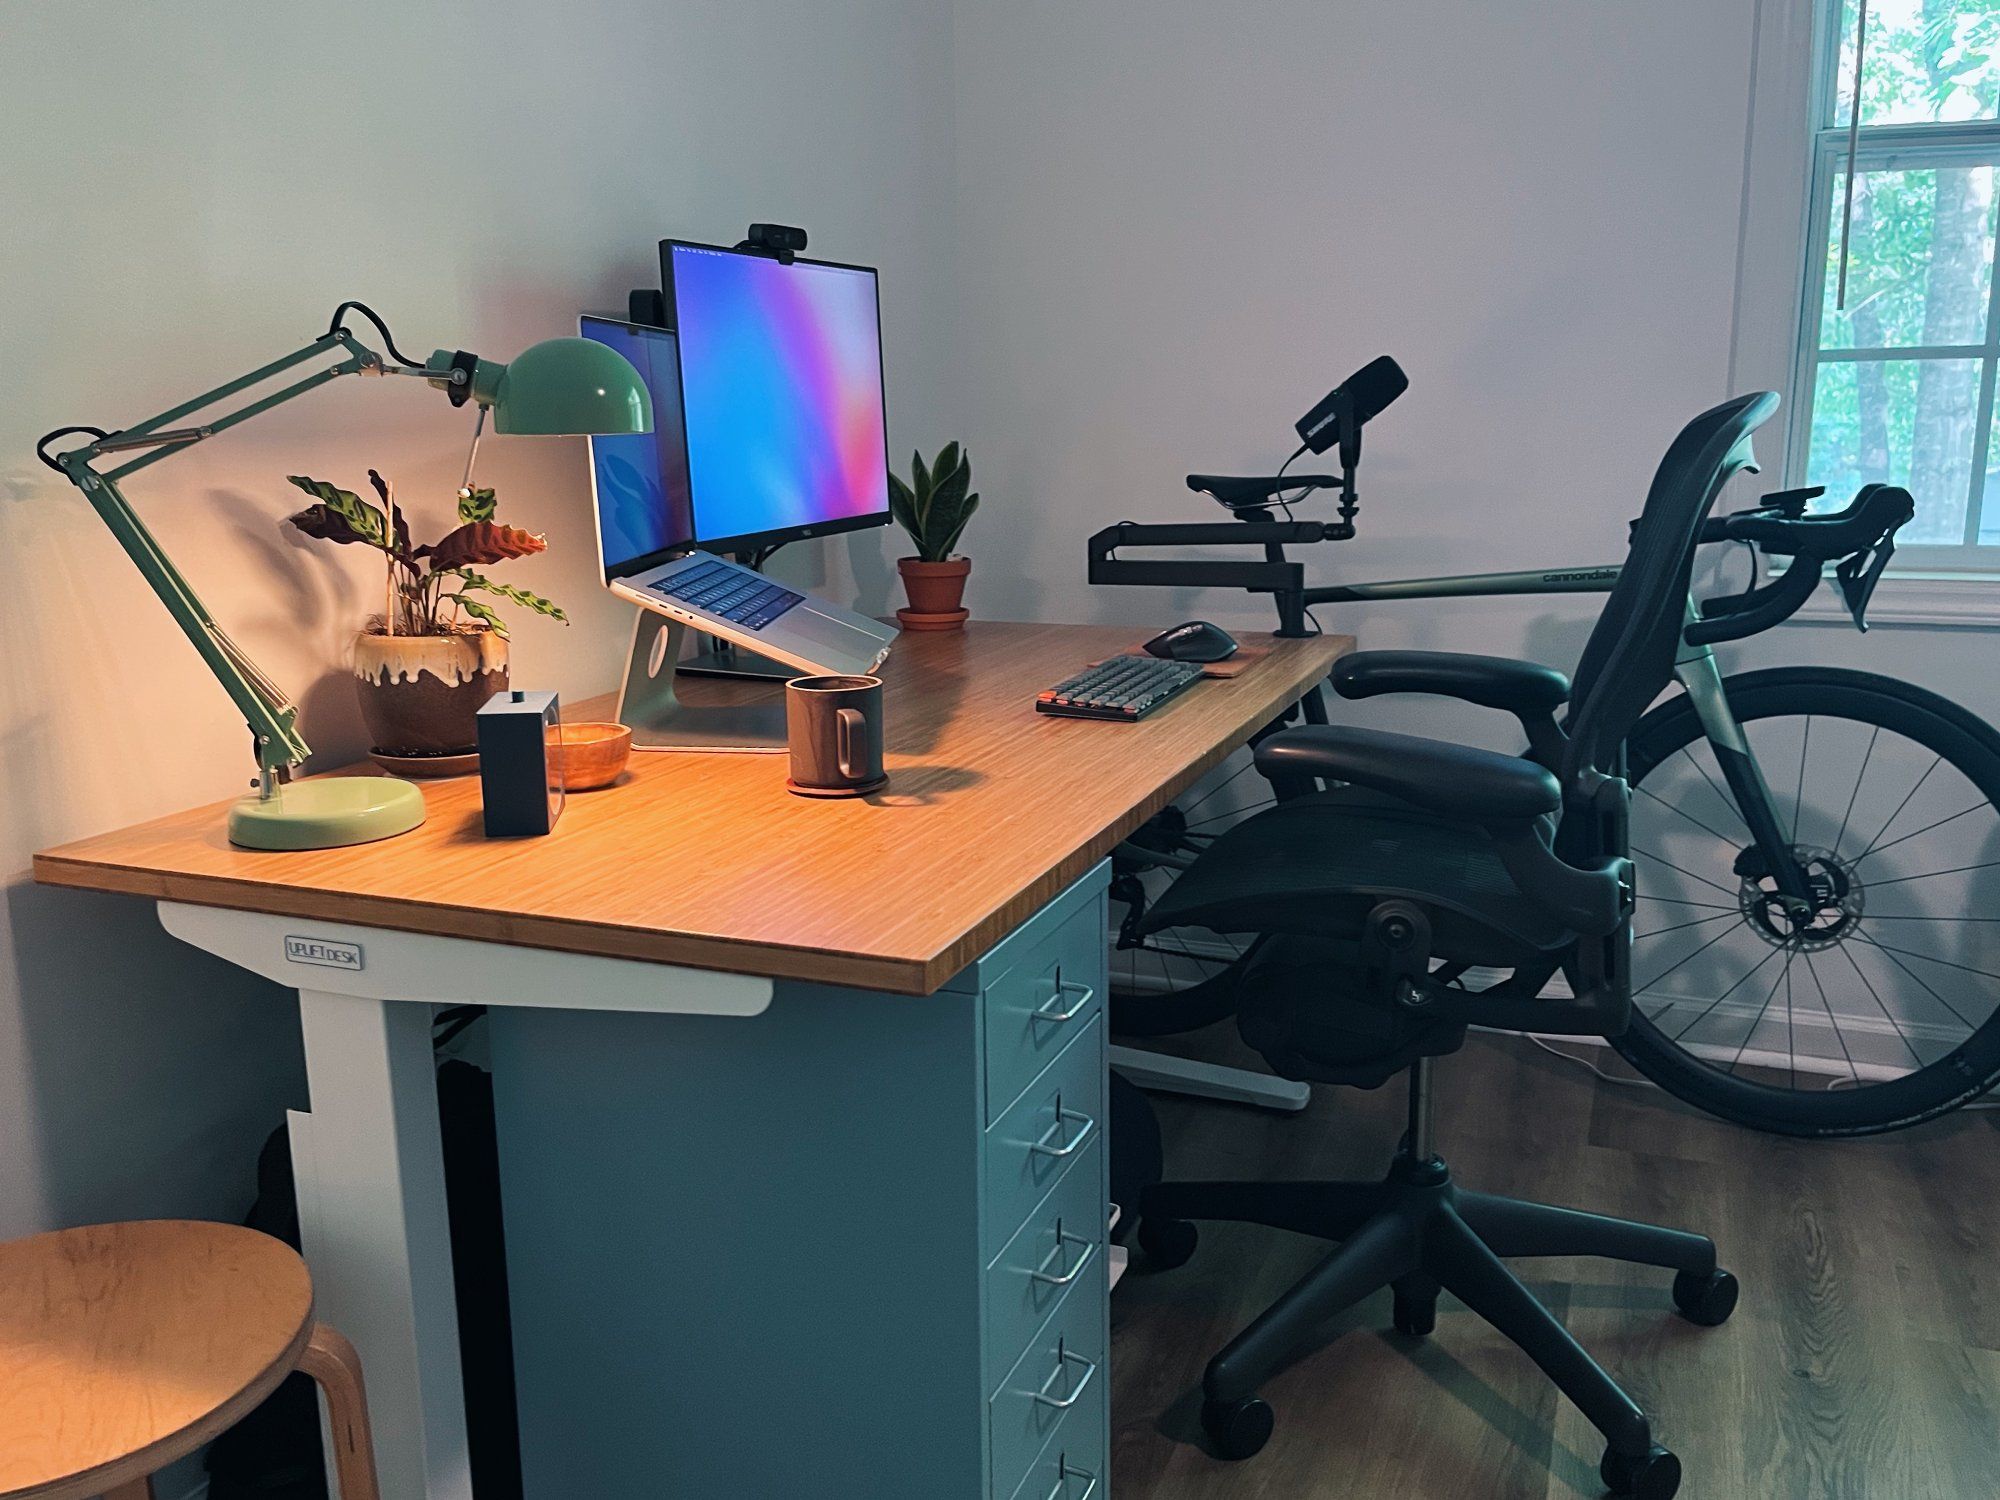 An view of a standing desk setup shows grey drawers, as well as an open MacBook Pro, an monitor, an olive table lamp, a mug, and some houseplants sitting on the desktop. Positioned between the desk and the window is a road bike